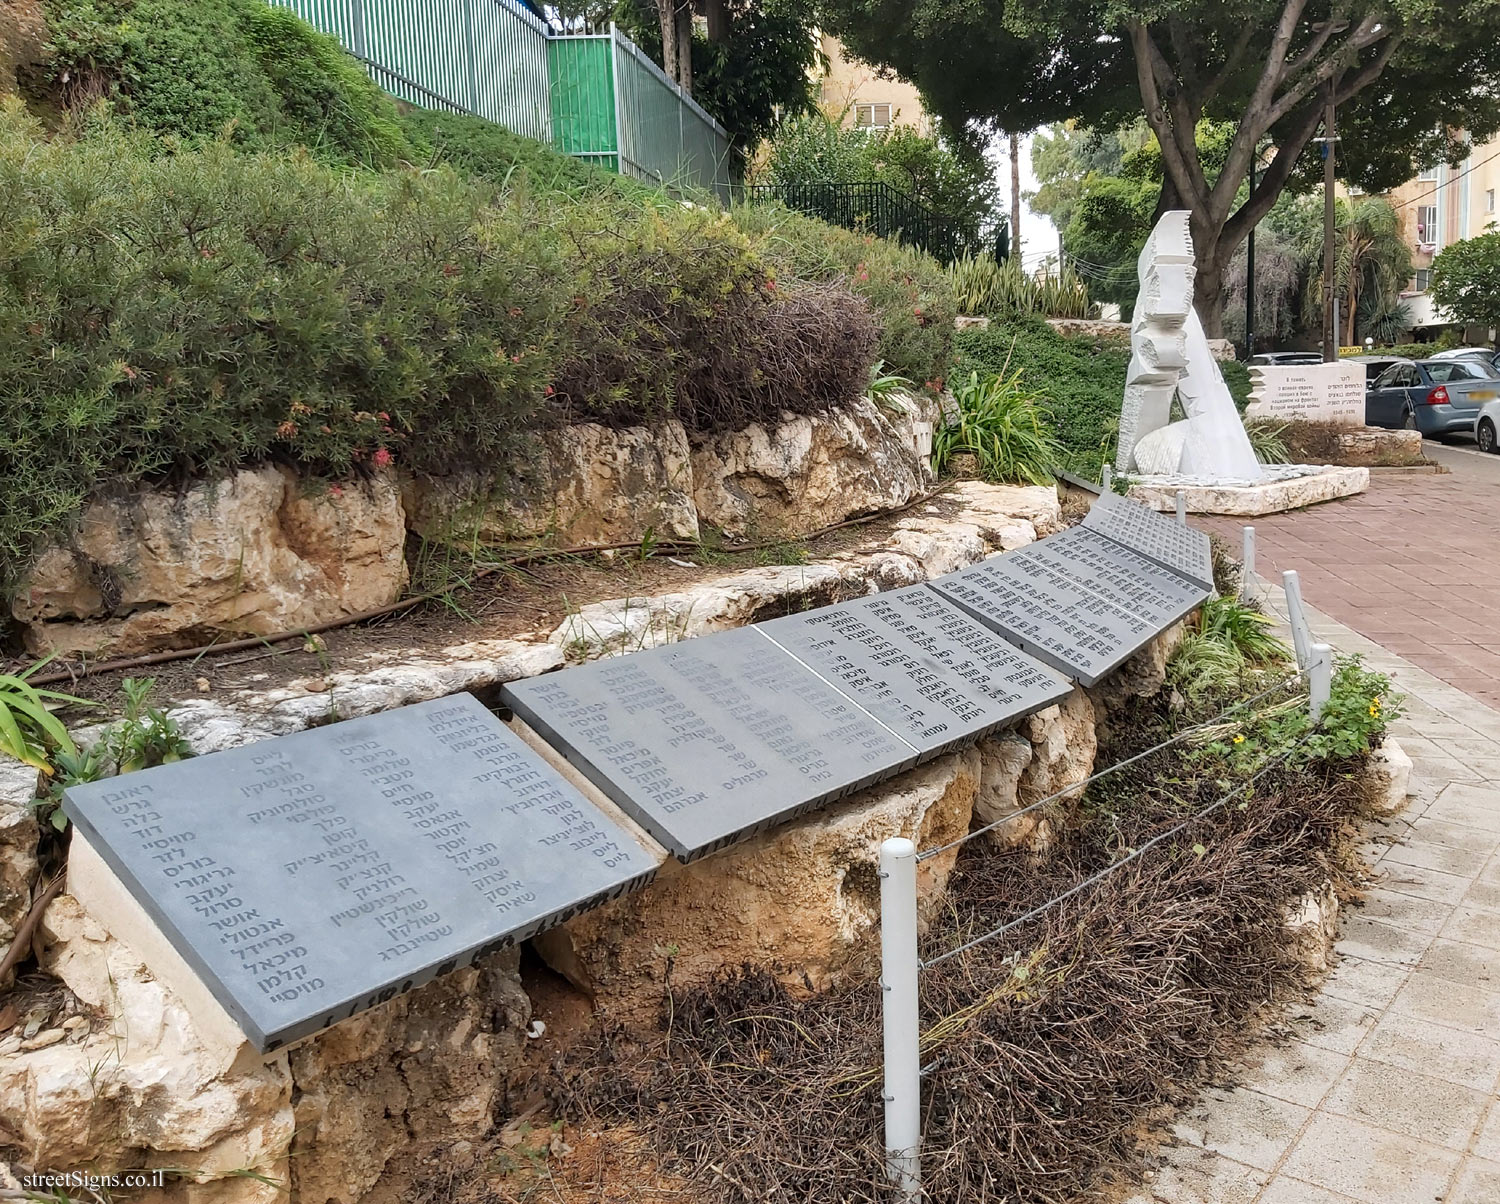 Rehovot - Garden of Heroism - a monument in memory of the Jews who fought the Nazis - A.D. Gordon St 55, Rehovot, Israel